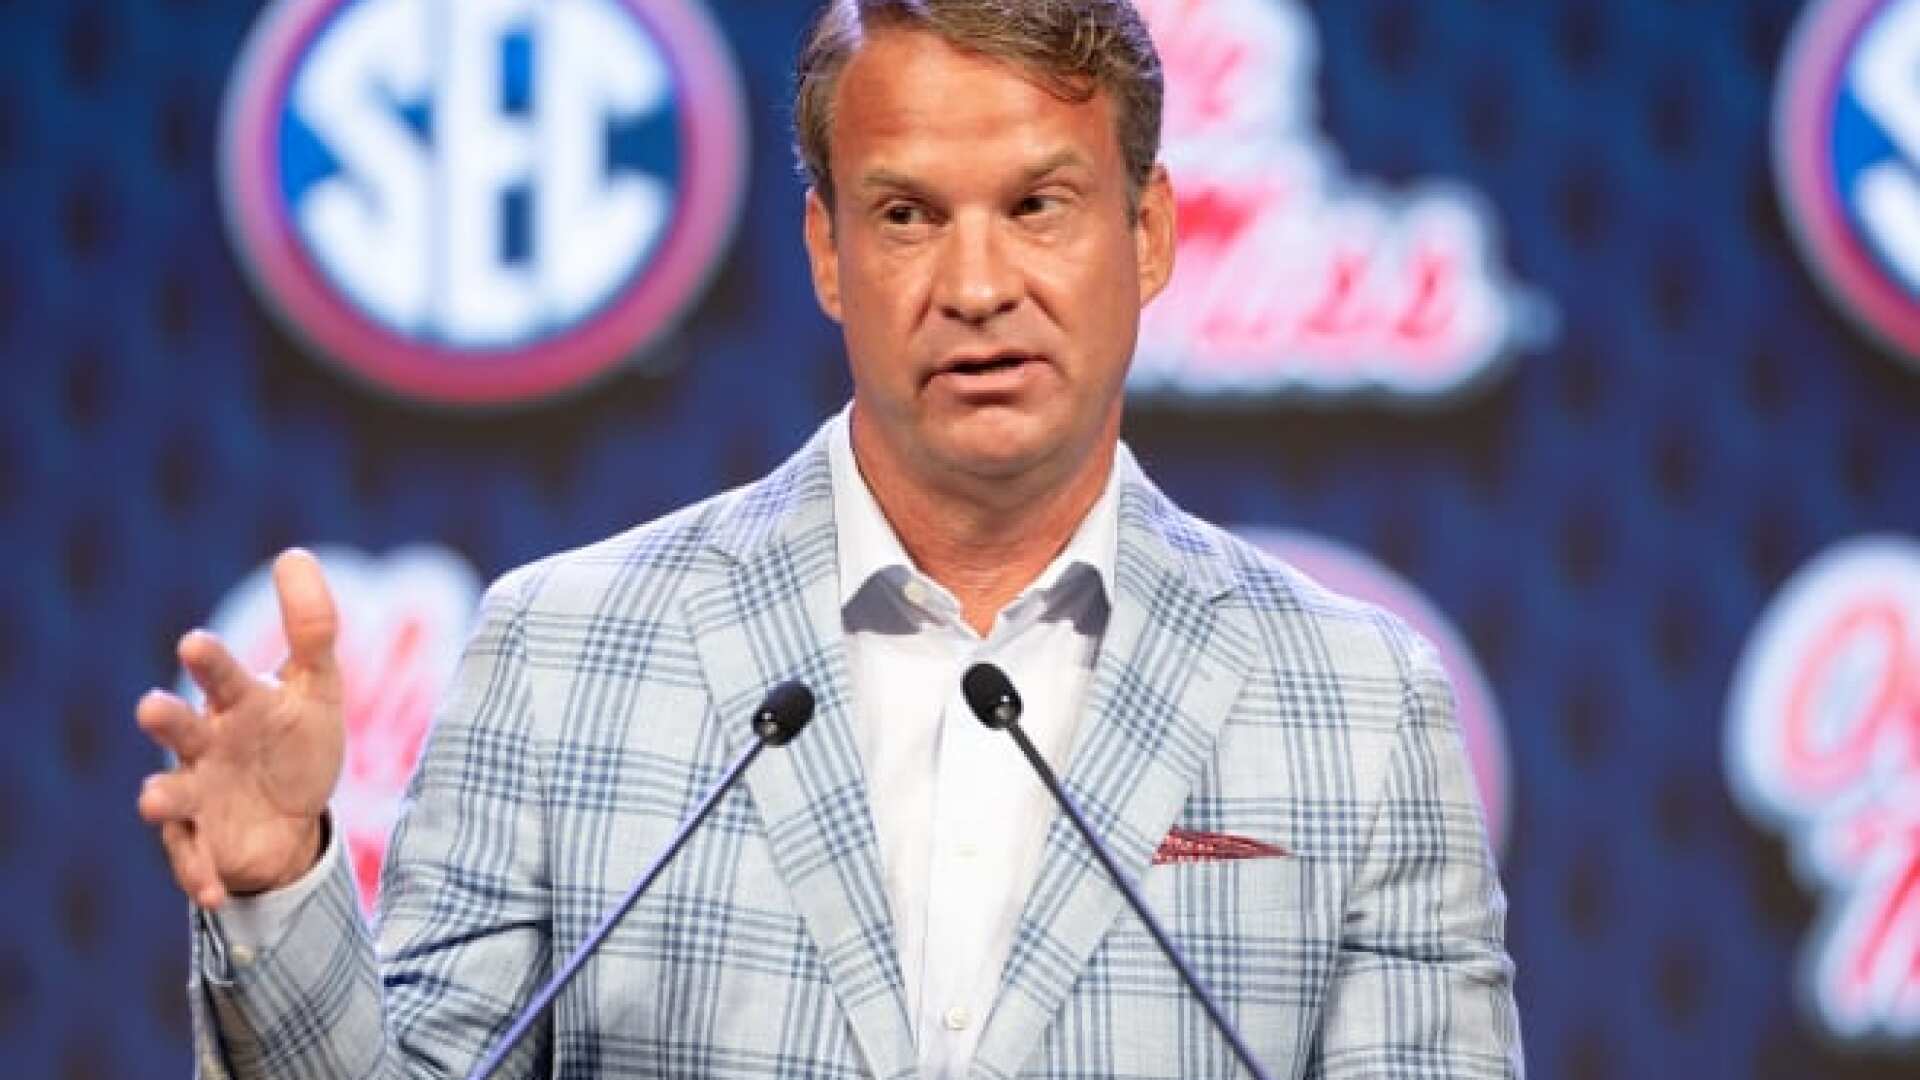 Tuesdays with Gorney: Lane Kiffin is having the last laugh